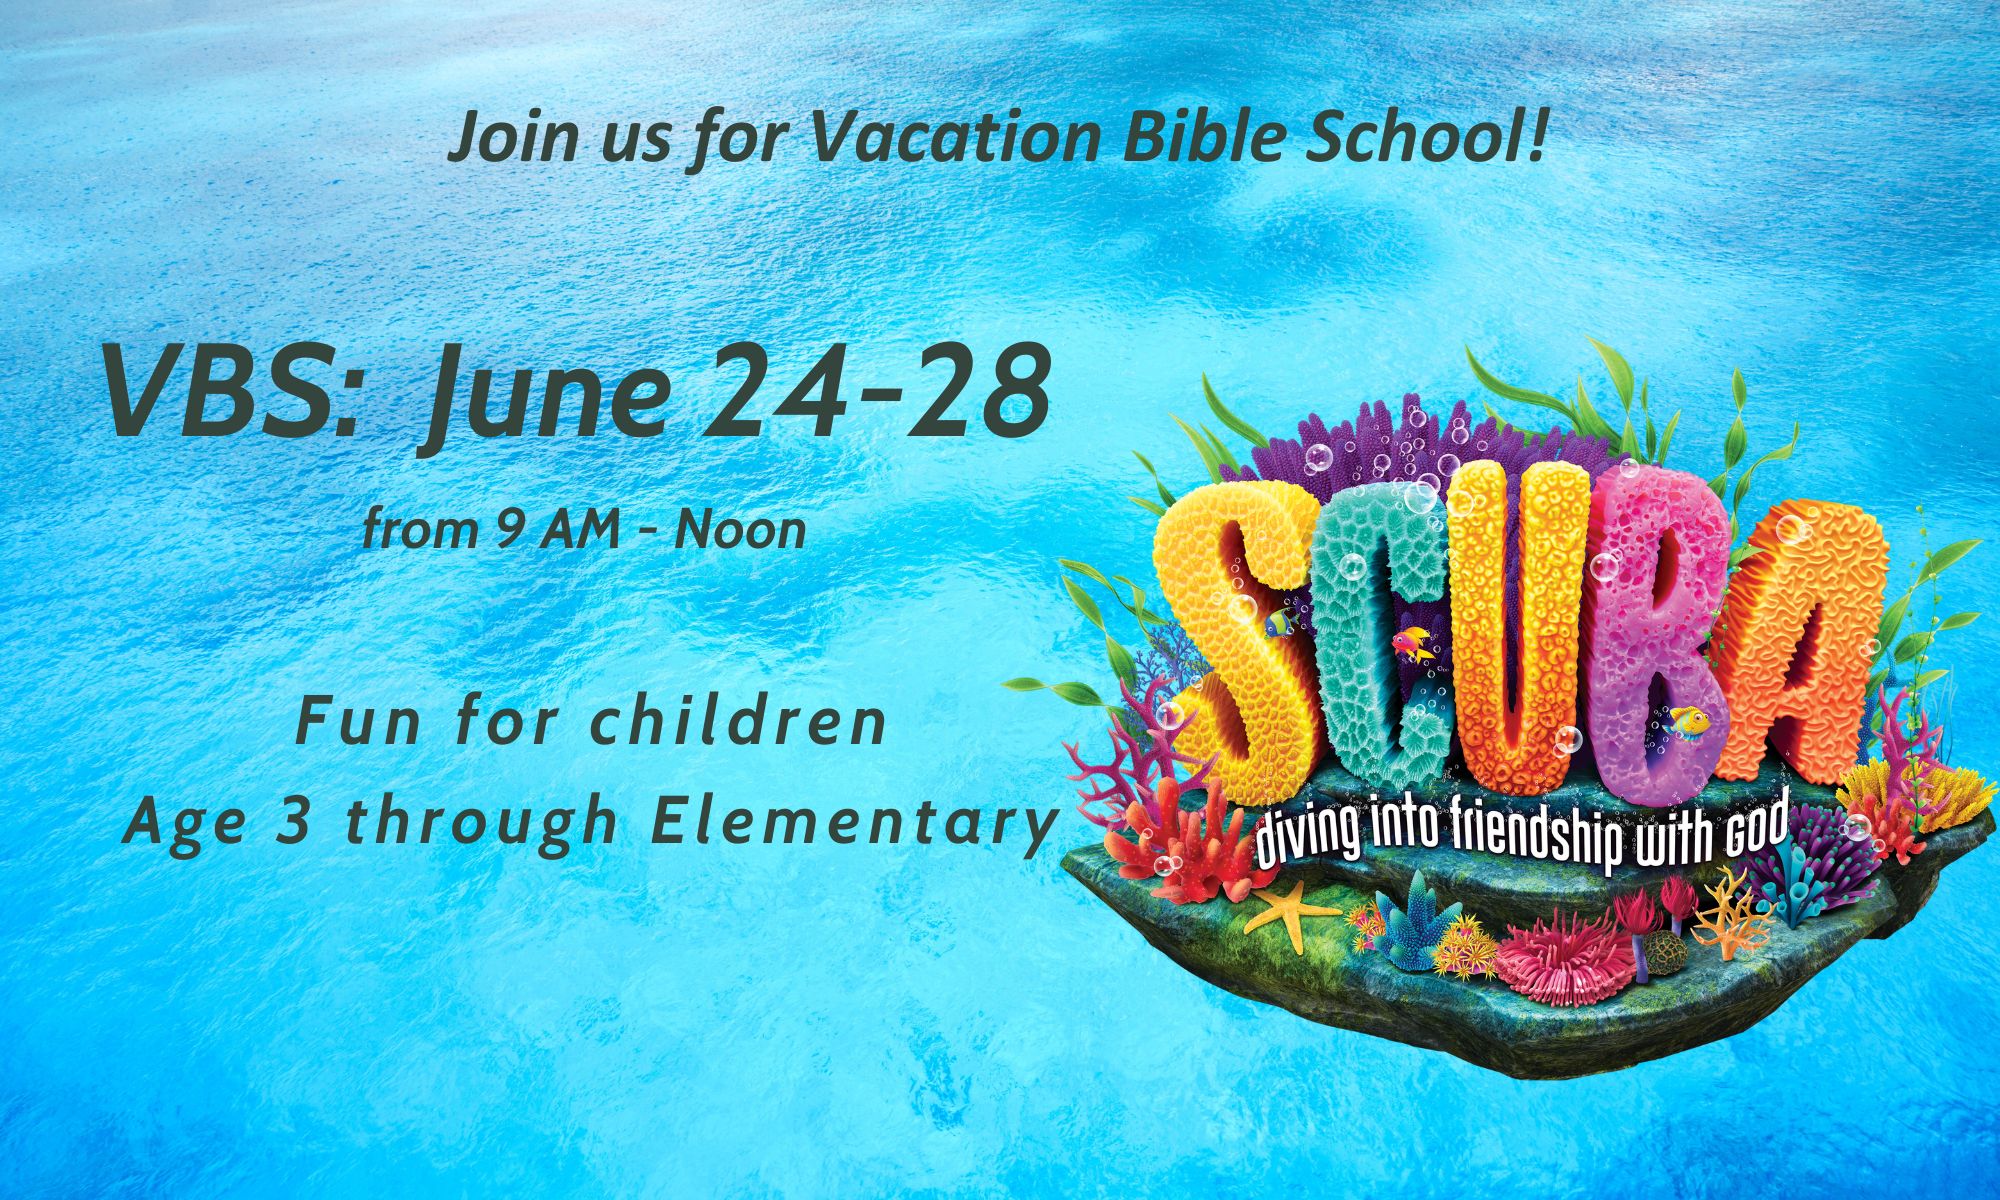 Undersea picture with SCUBA Driving Into Friendship With God (VBS Logo)